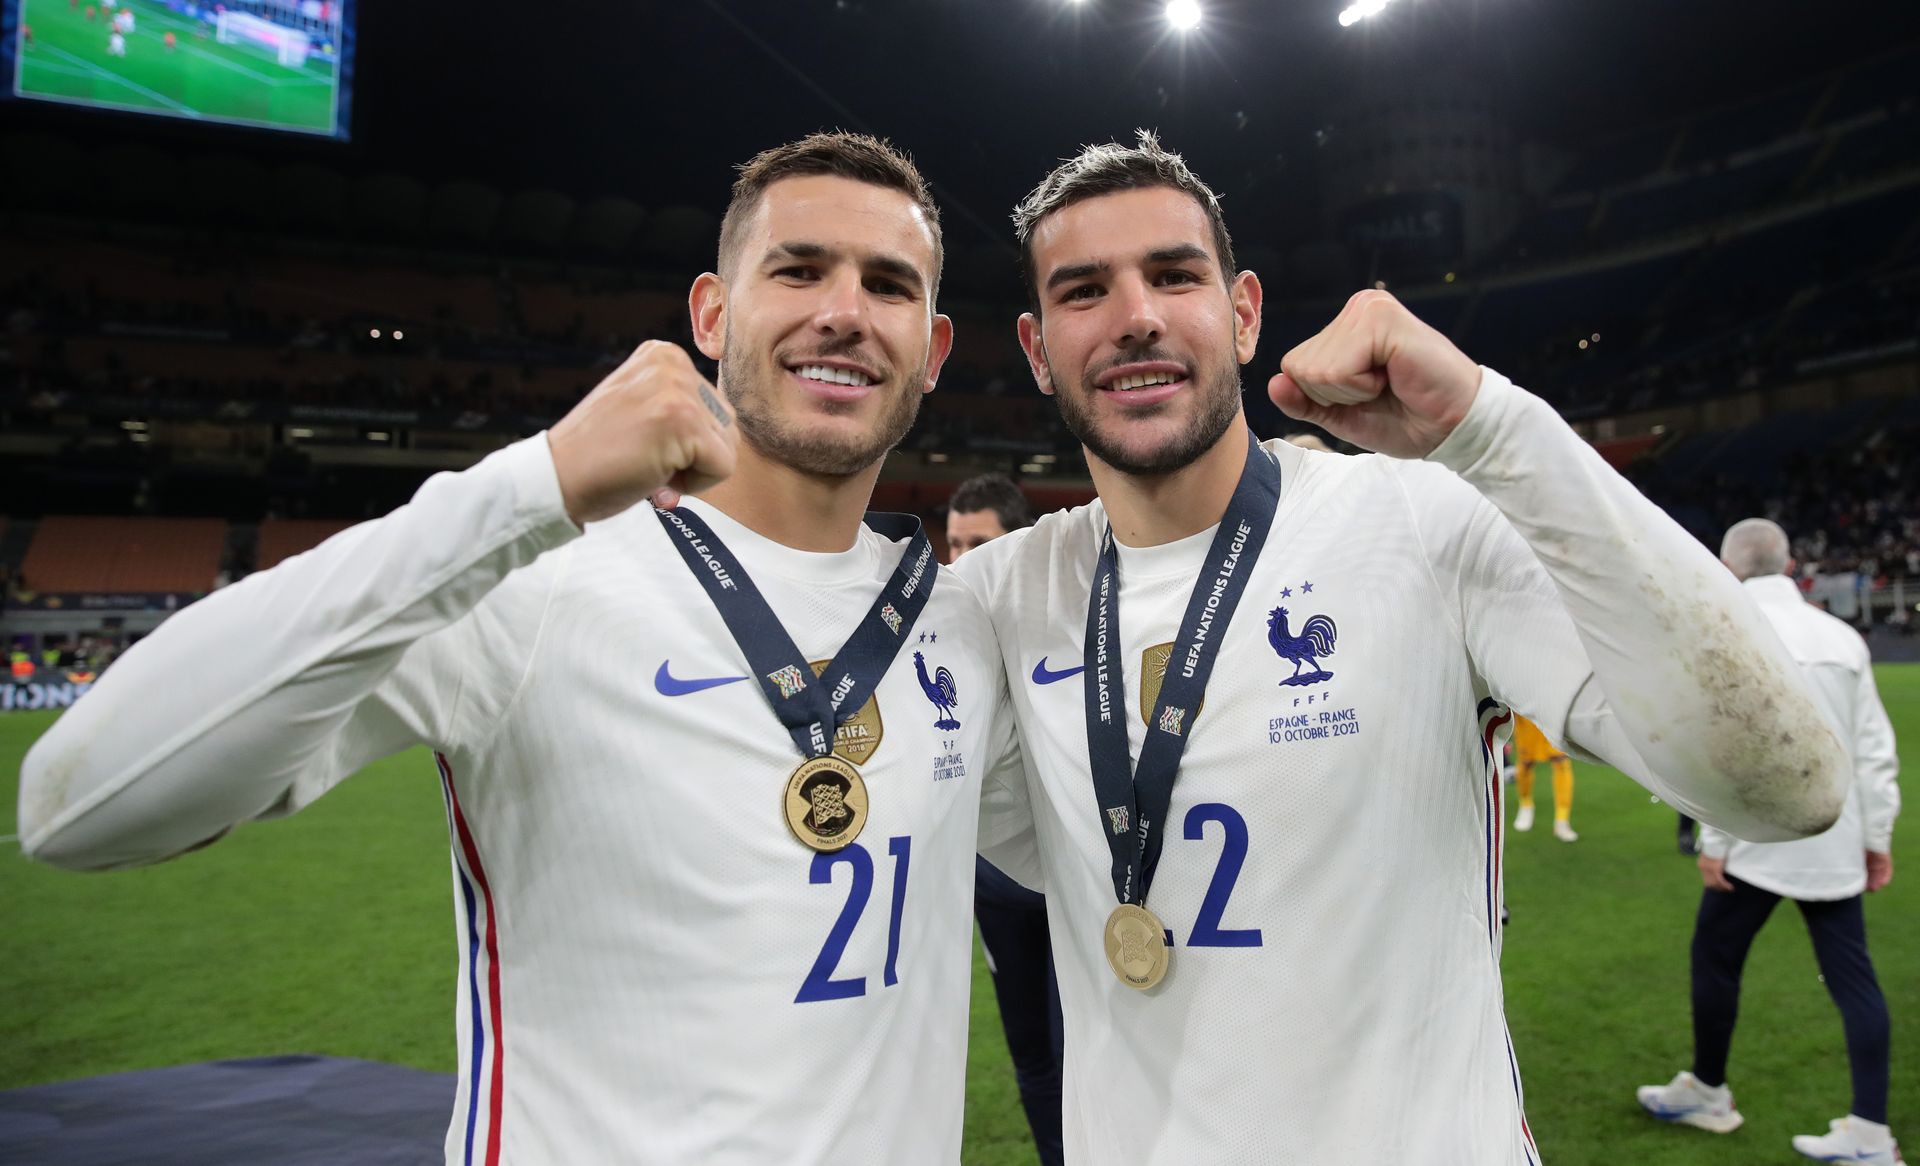 <p>                     Lucas and Theo Hernandez came through the youth system together at Atletico Madrid. Both brothers opted to represent France and Lucas, a central defender, won the World Cup in 2018 and moved to Bayern Munich the following year.                   </p>                                      <p>                     Theo never played an official game for Atletico, controversially moving to Real Madrid before establishing himself at AC Milan later on. The left-back was part of the France side which lost the 2022 World Cup final to Argentina, with Lucas ruled out through an injury picked up in the group stages. The pair won the UEFA Nations League in 2021.                   </p>